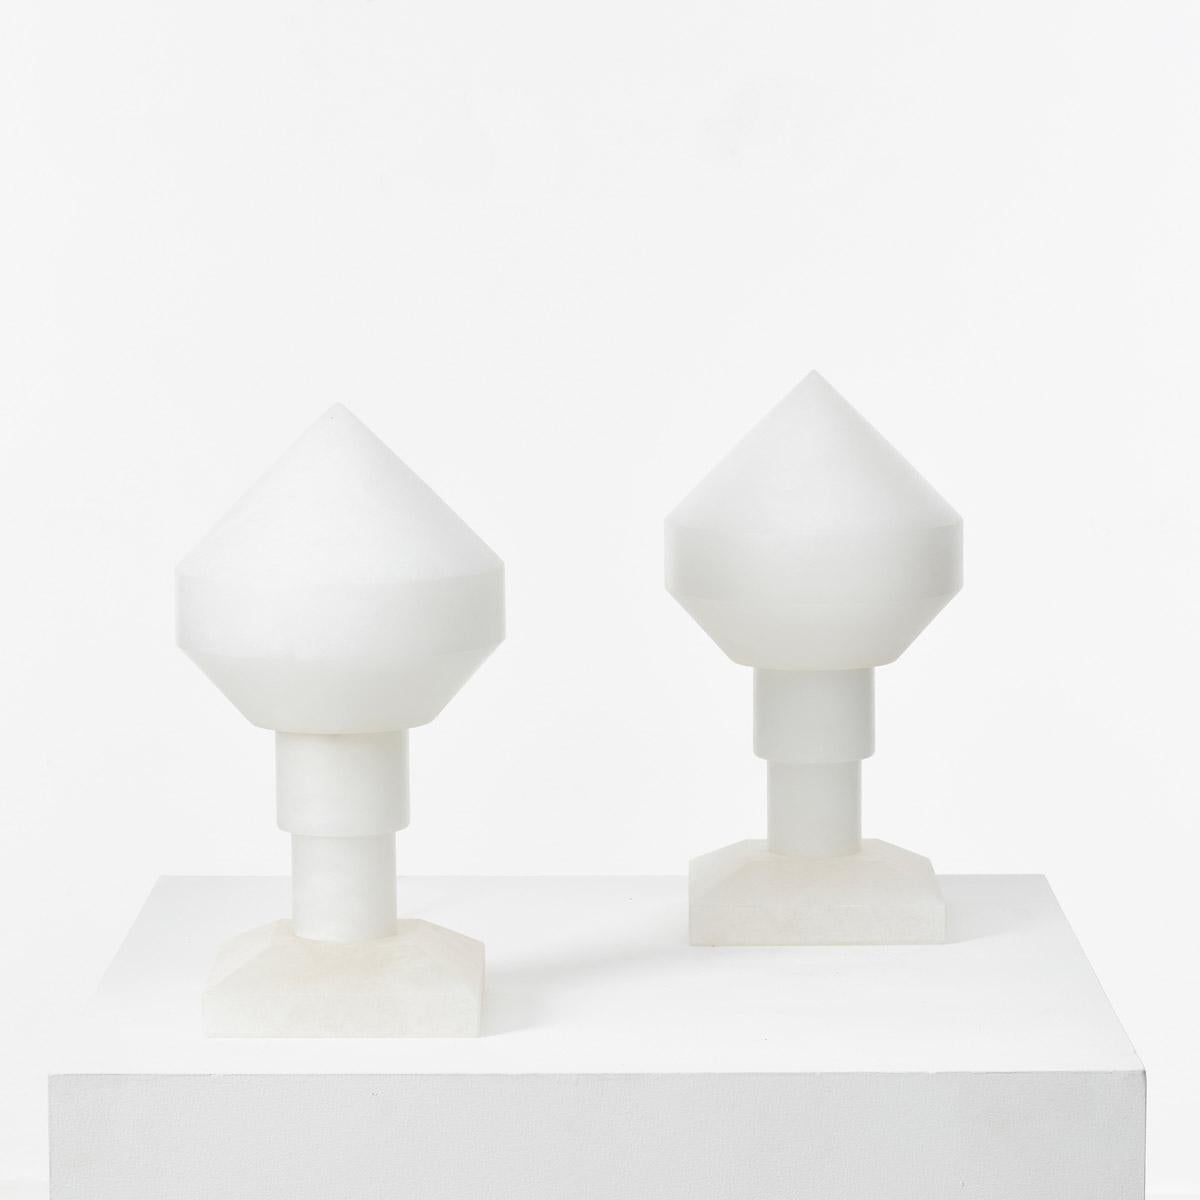 A pair of ‘Zeleste’ alabaster table lamps designed by Santiago Roqueta and Angel Jové. These lamps are a rare first edition example distinctive for their beautifully considered form that has been carved from alabaster stone. The conical shade is